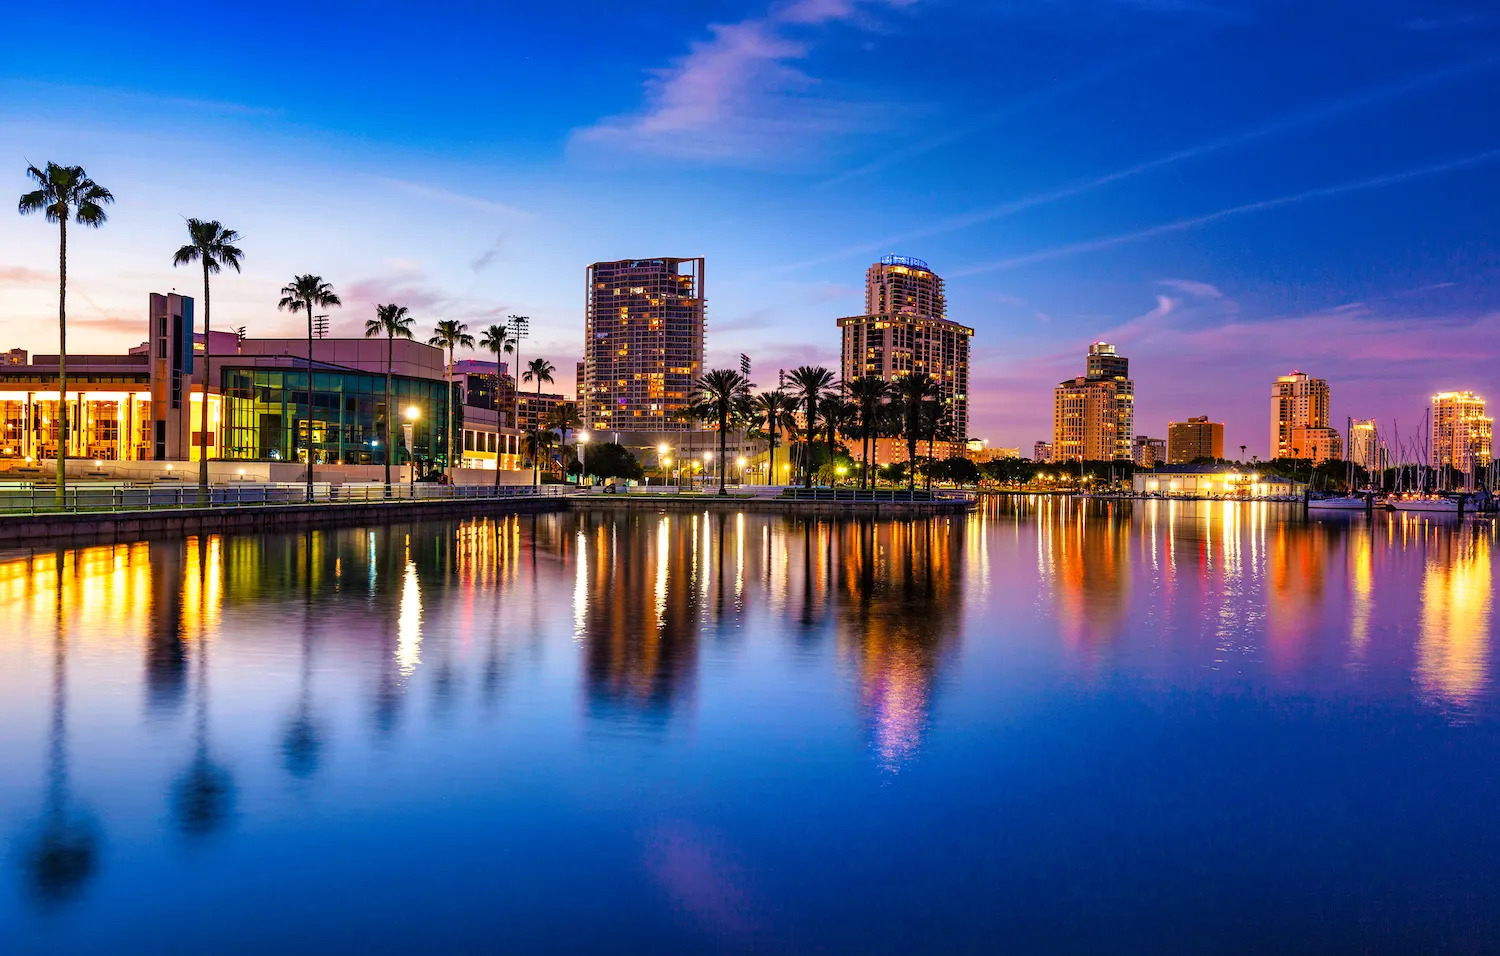 36 Facts About St. Petersburg (FL)